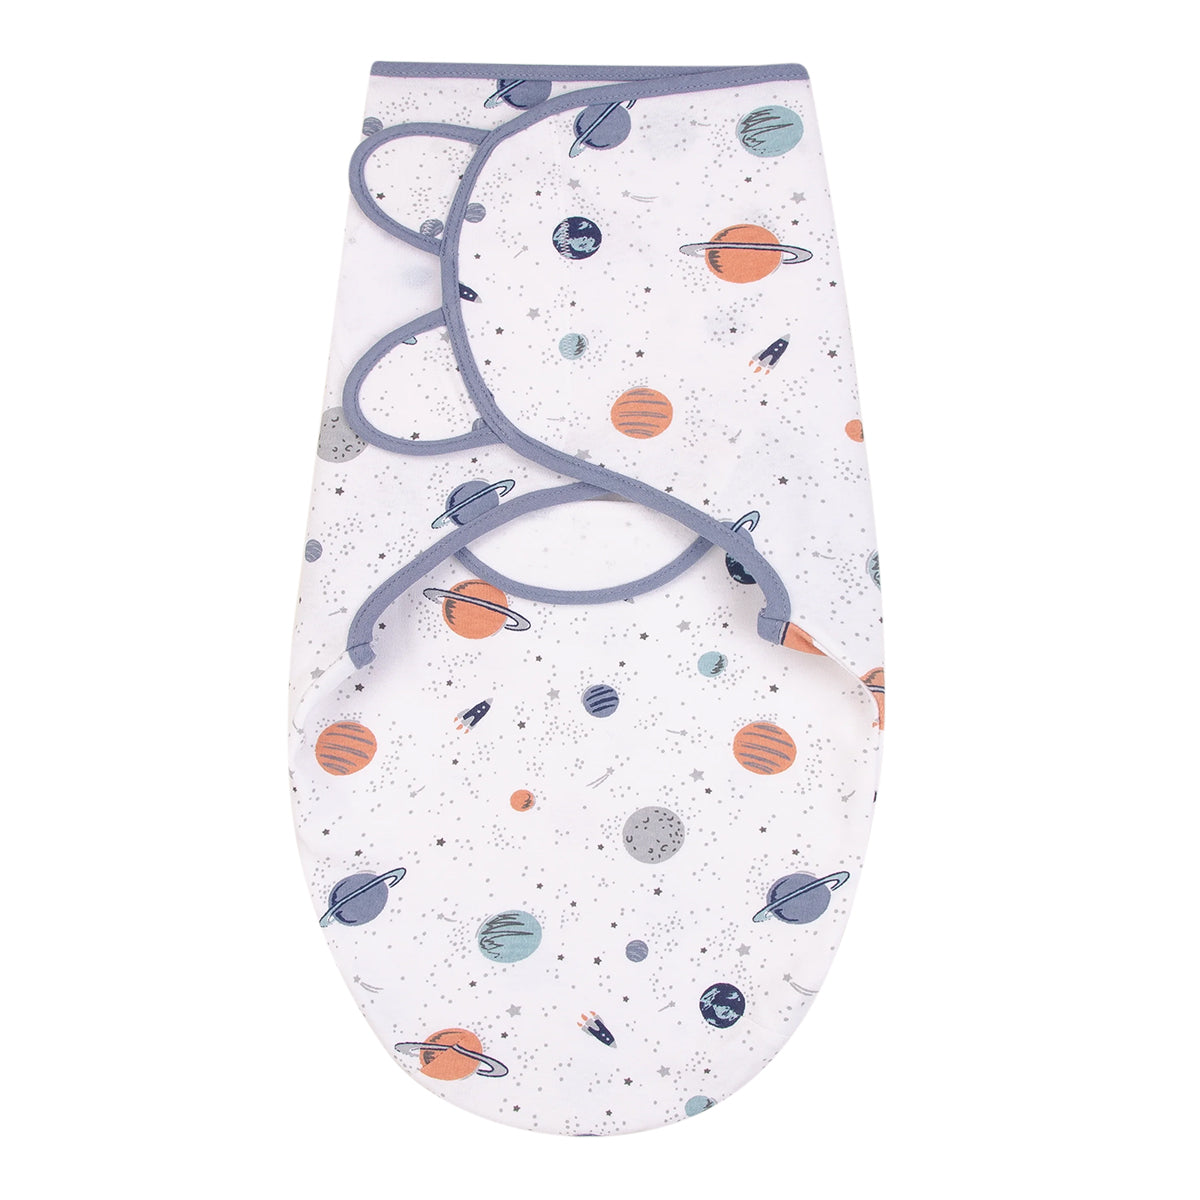 Hudson Baby - Wrap Swaddle Blanket - Space